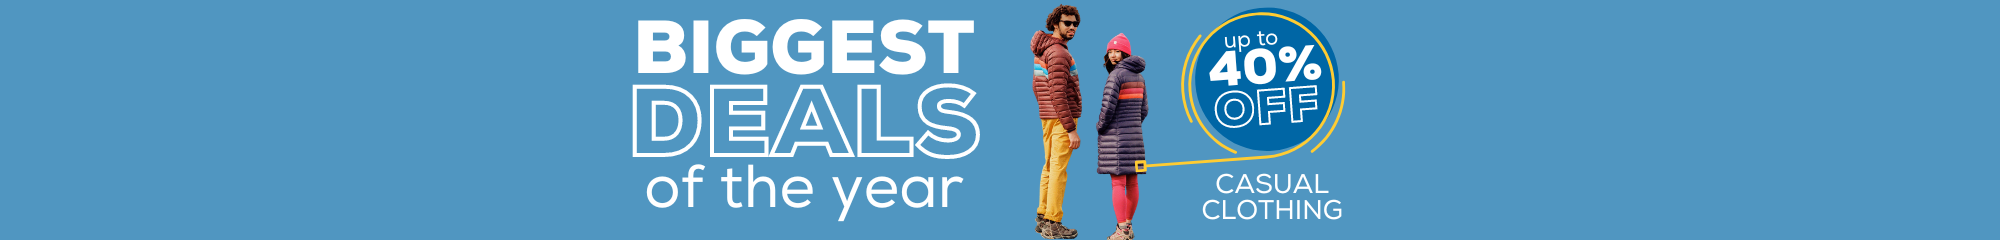 BIGGEST SALE OF THE YEAR - CASUAL CLOTHING, T-SHIRTS, PANTS & SHORTS, HOODIES, JACKETS & MORE